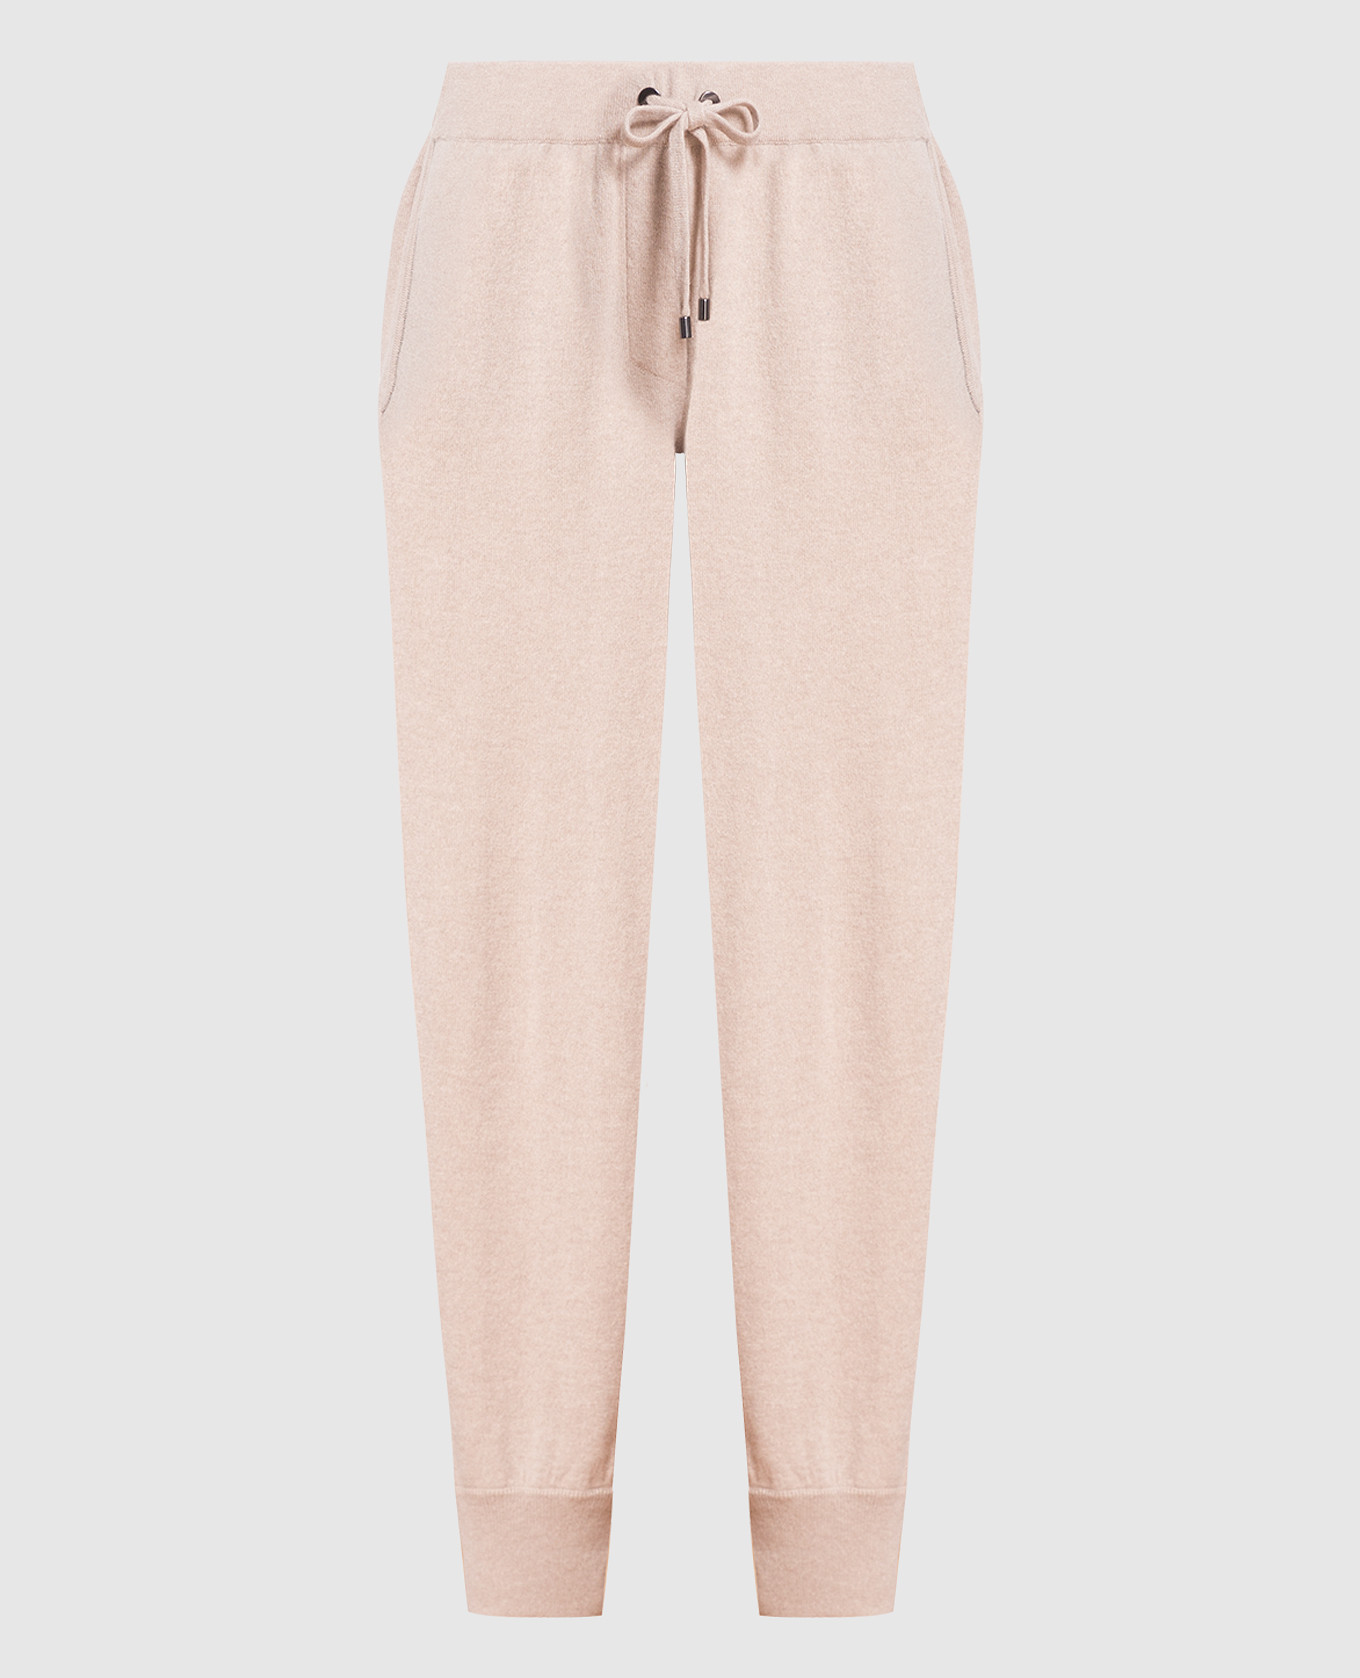 Beige cashmere joggers with monil chain